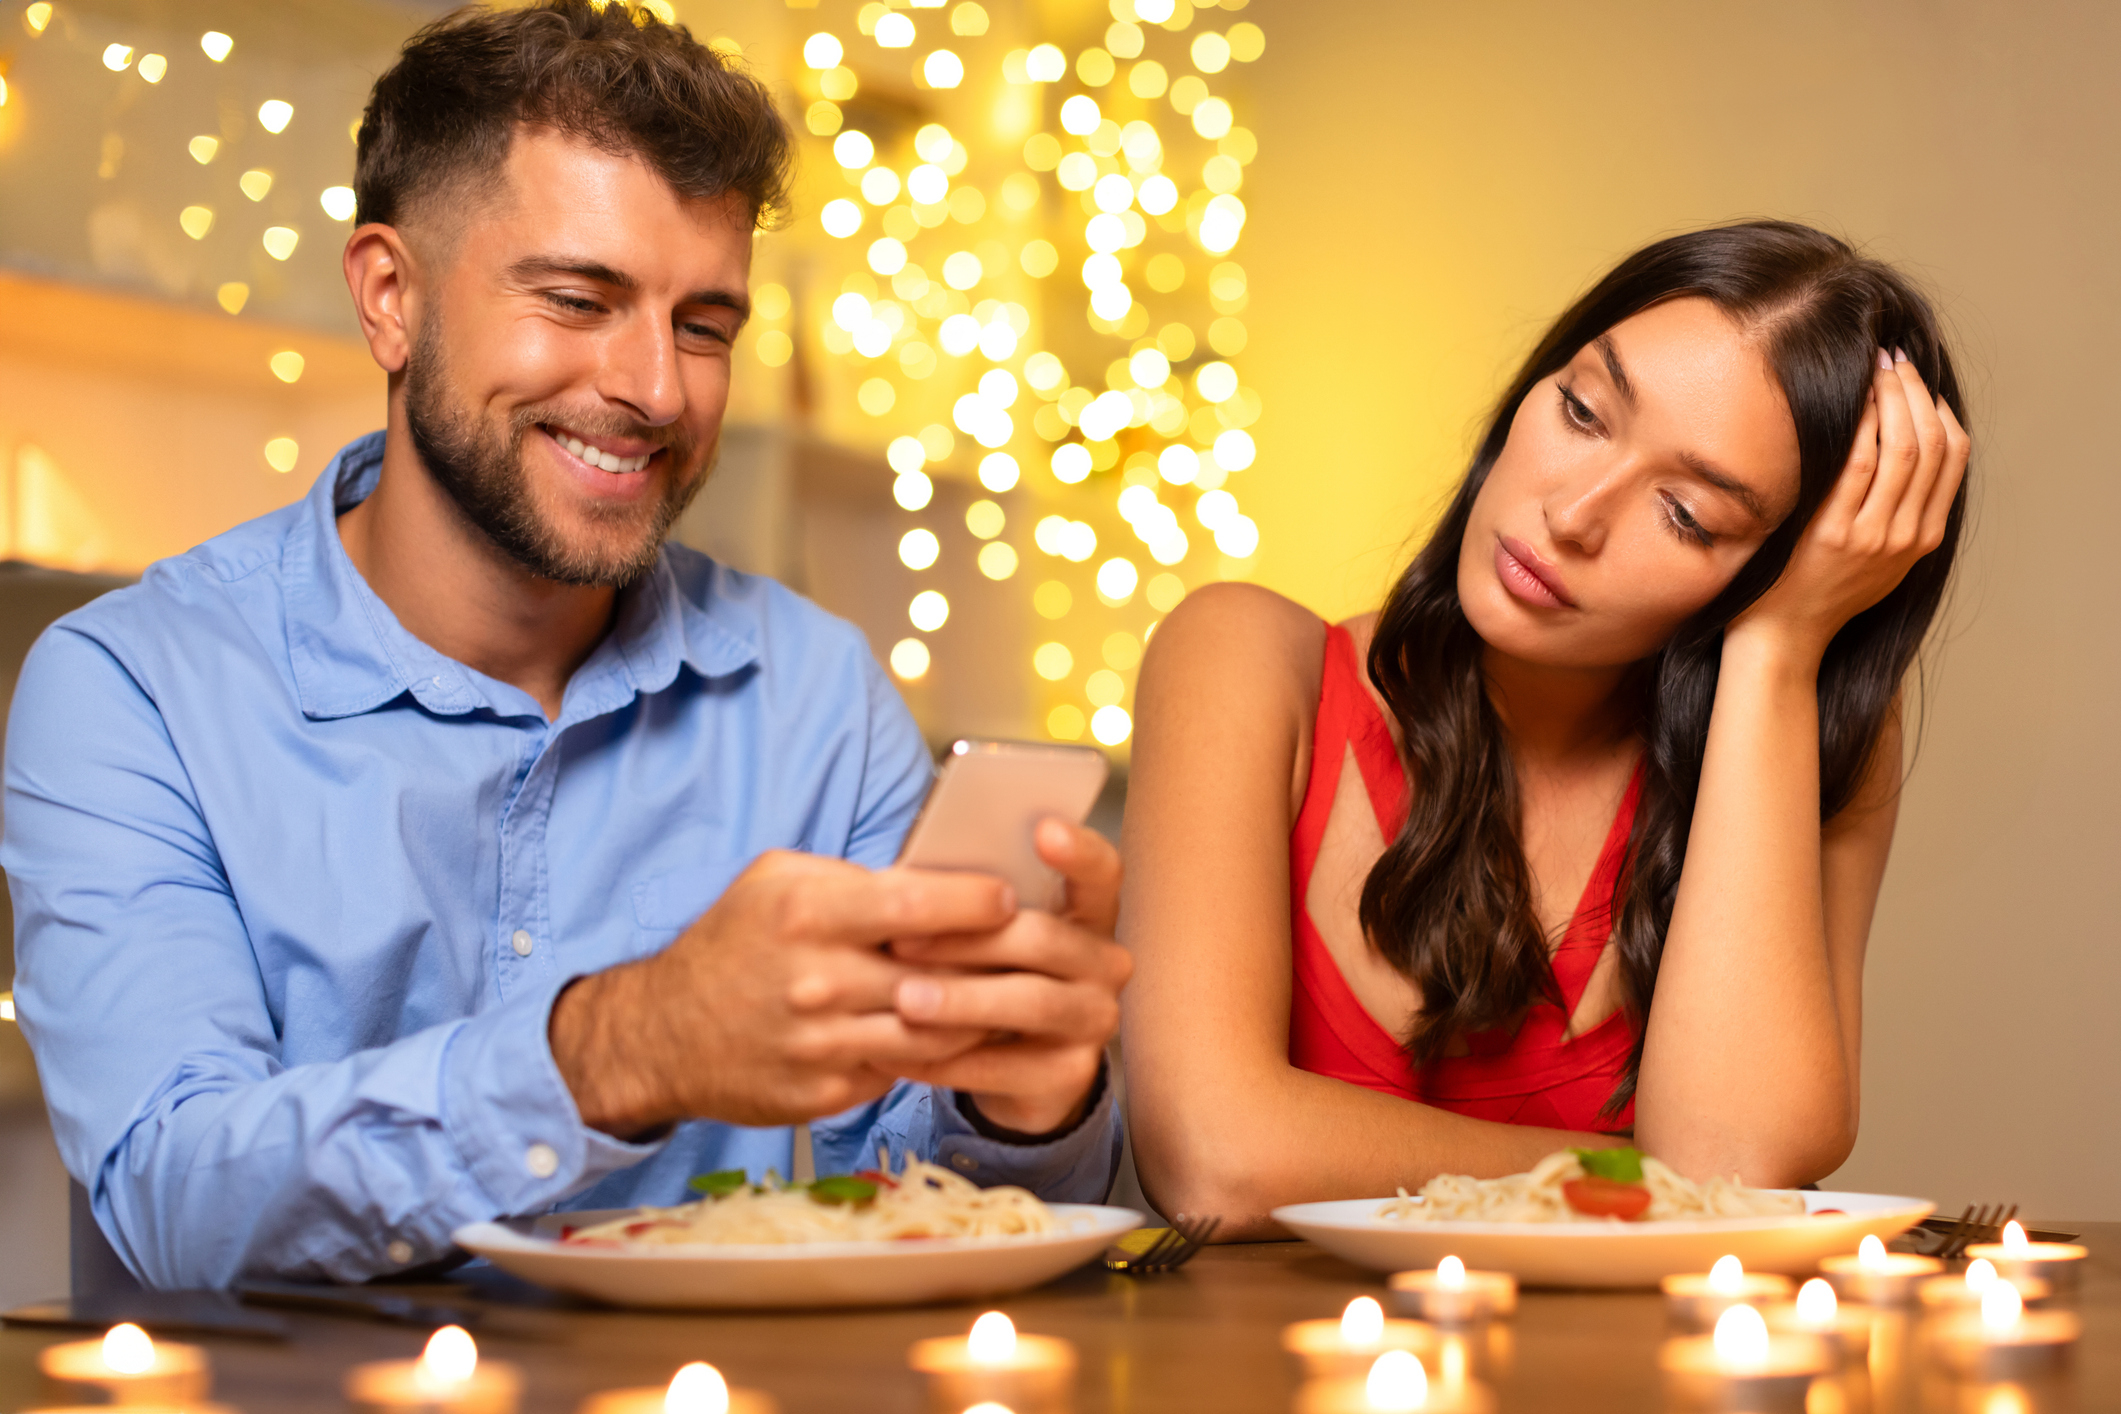 Man smiling at phone on date while woman looks bored